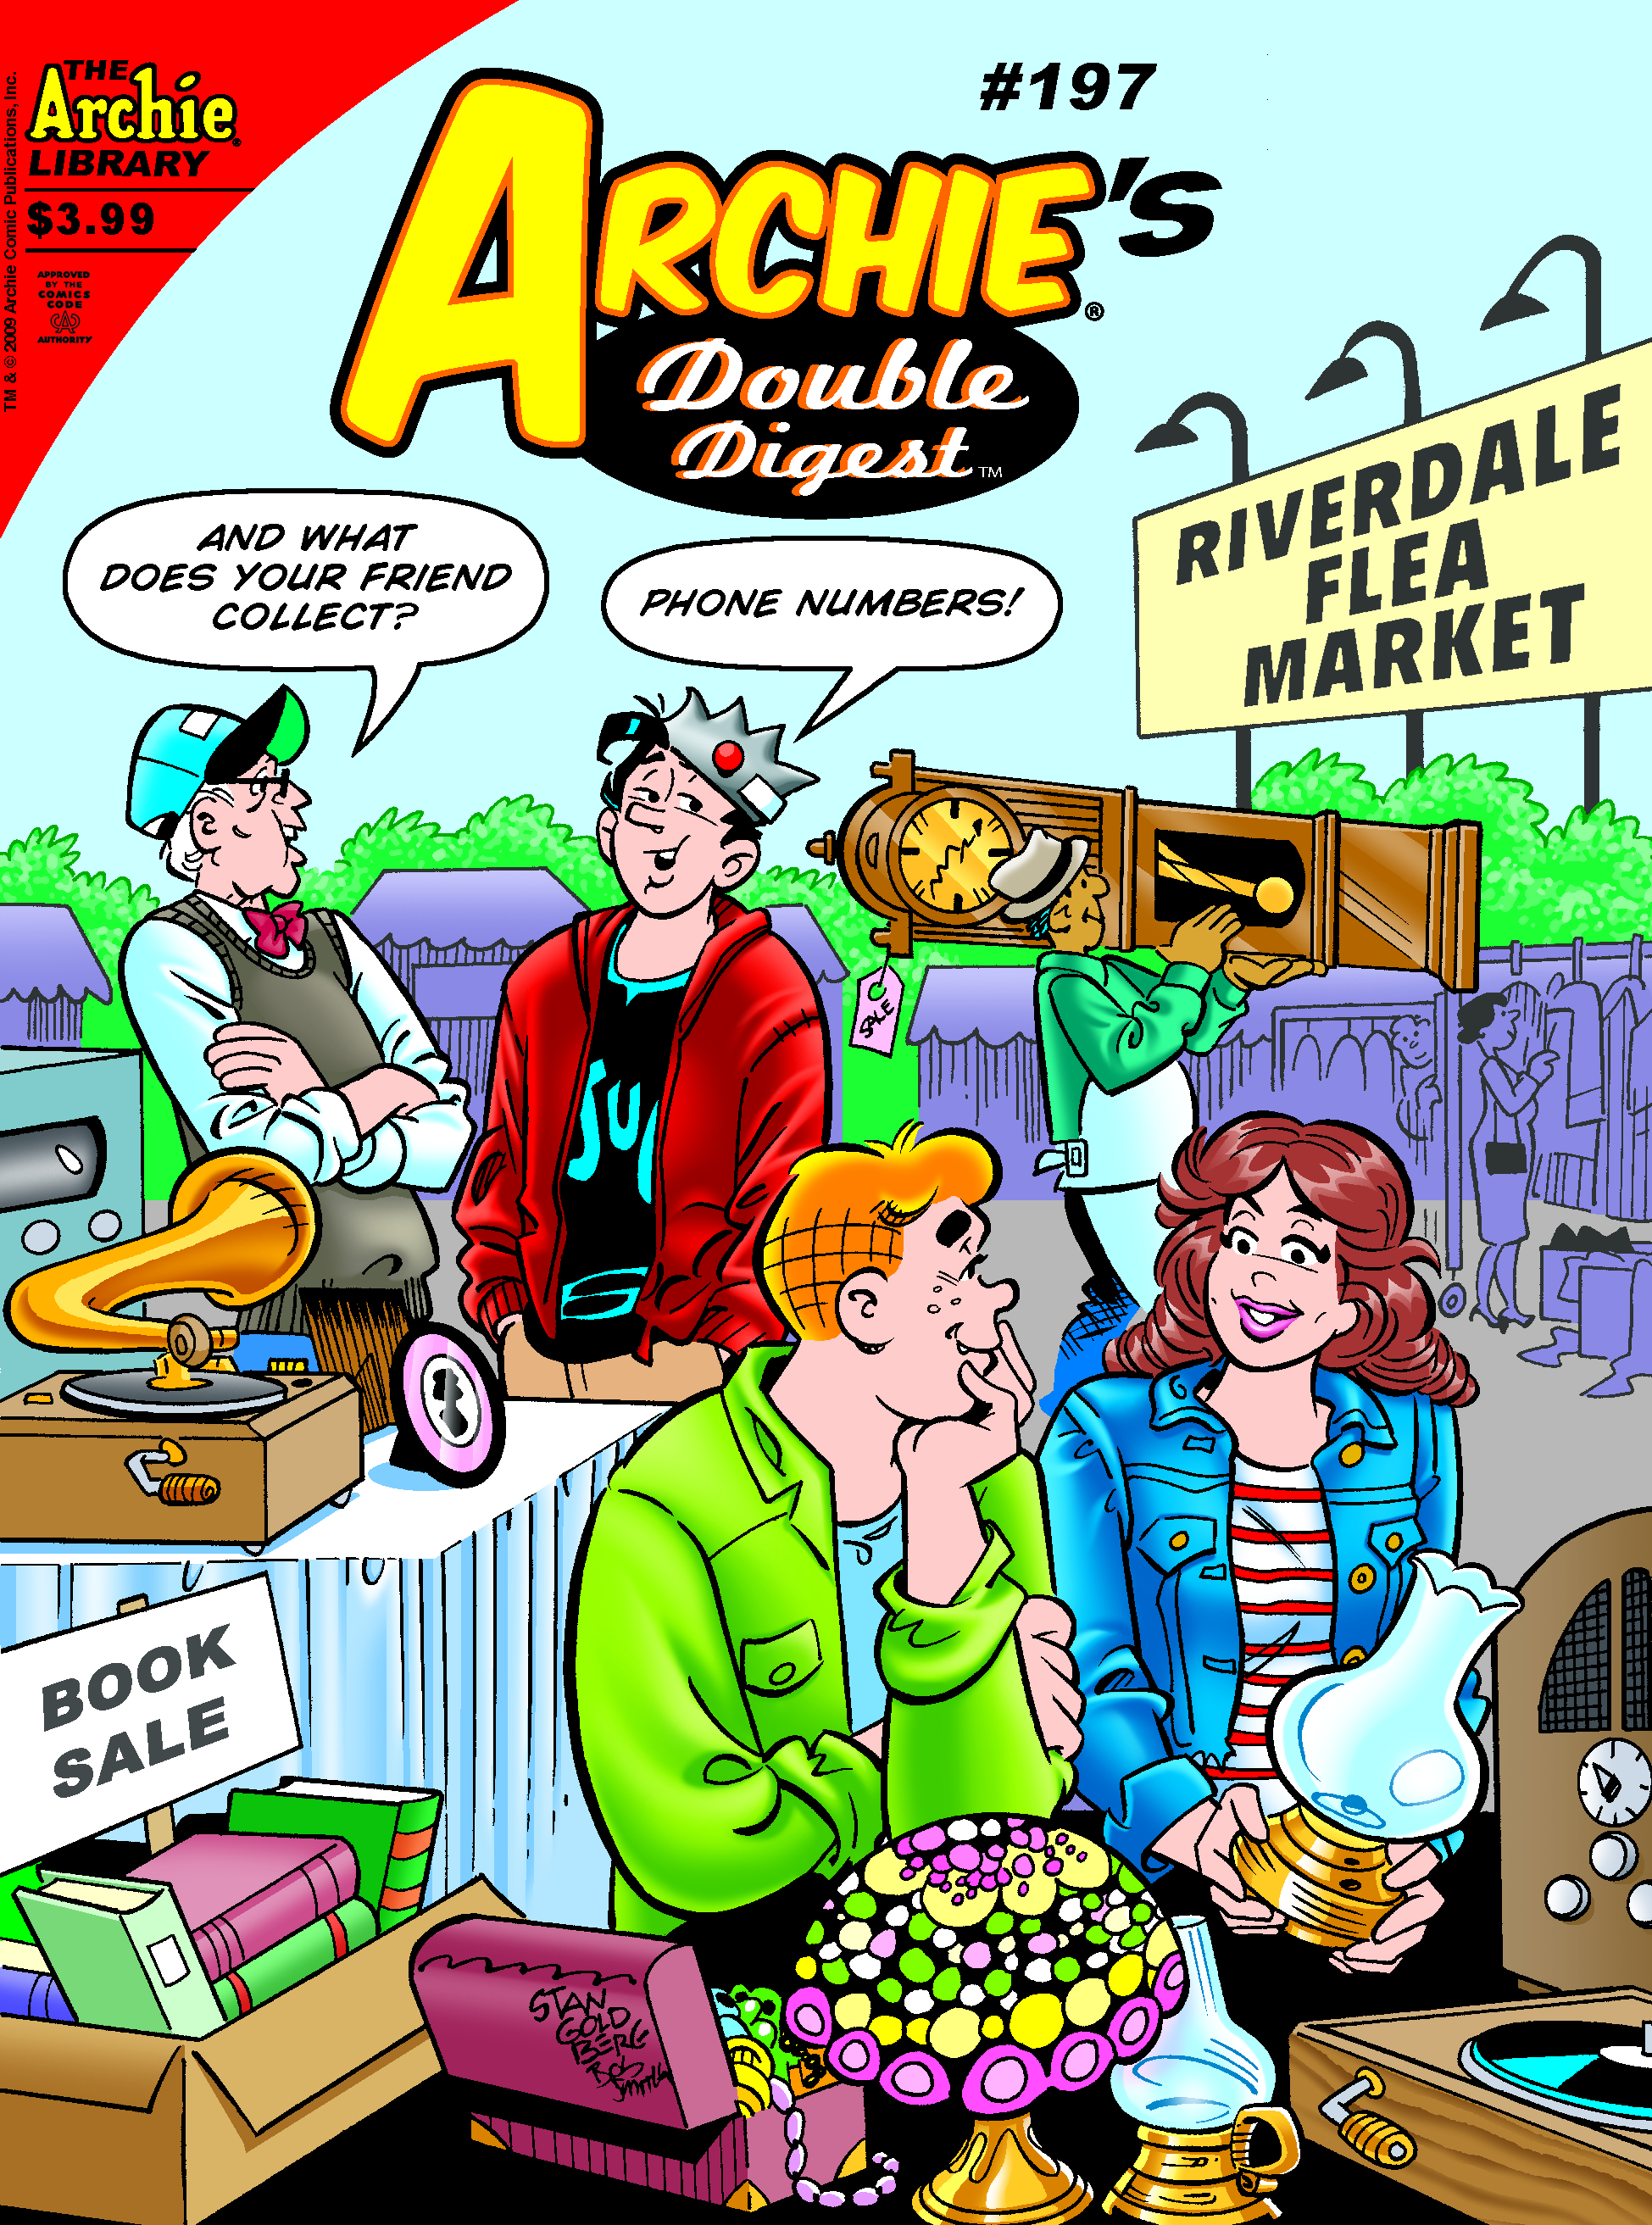 ARCHIE DOUBLE DIGEST #197 (NOTE PRICE)